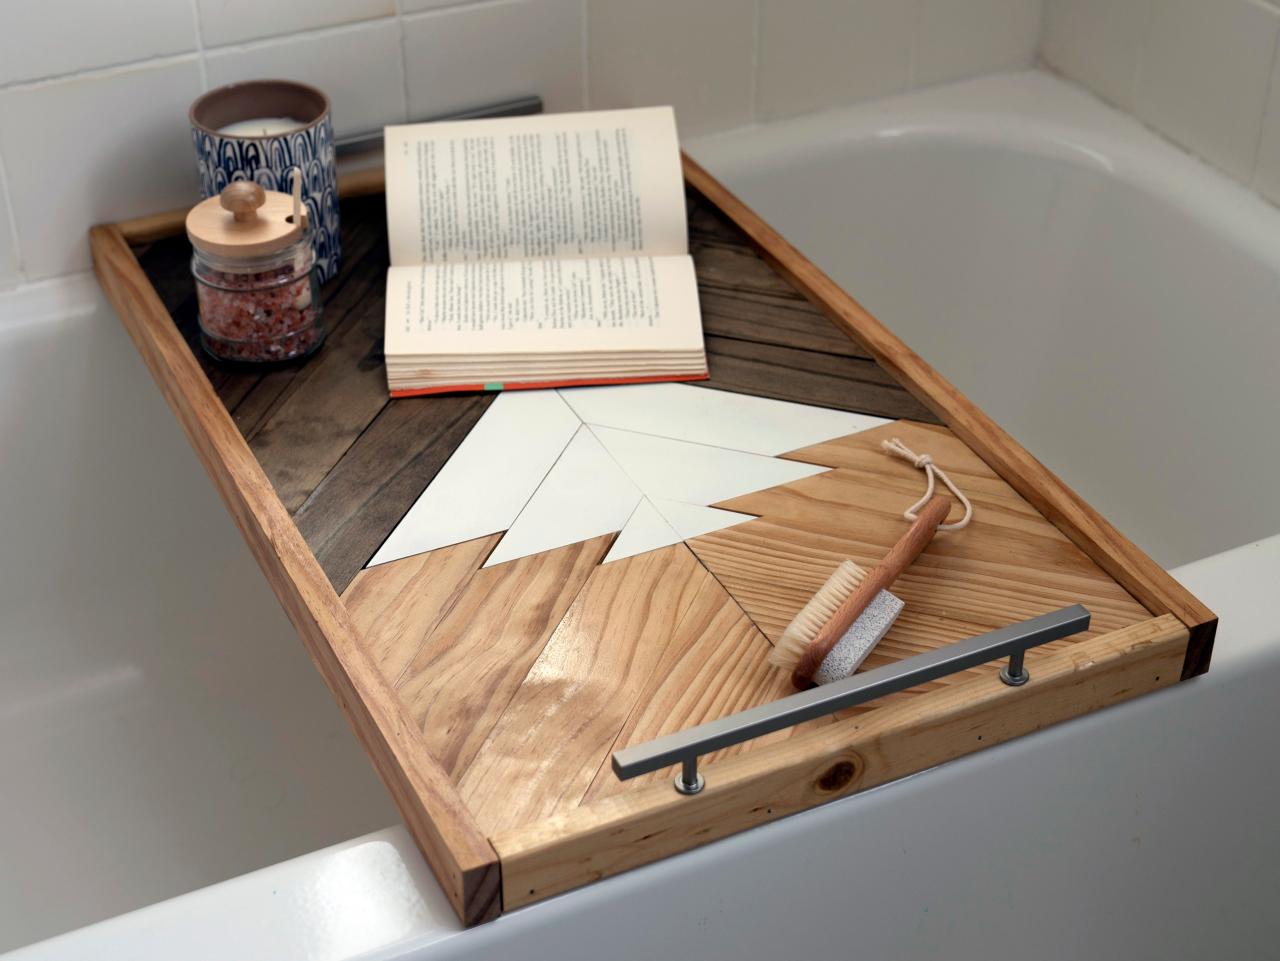 How To Make A Wood Bath Tray That Also Serves As Artwork Diy